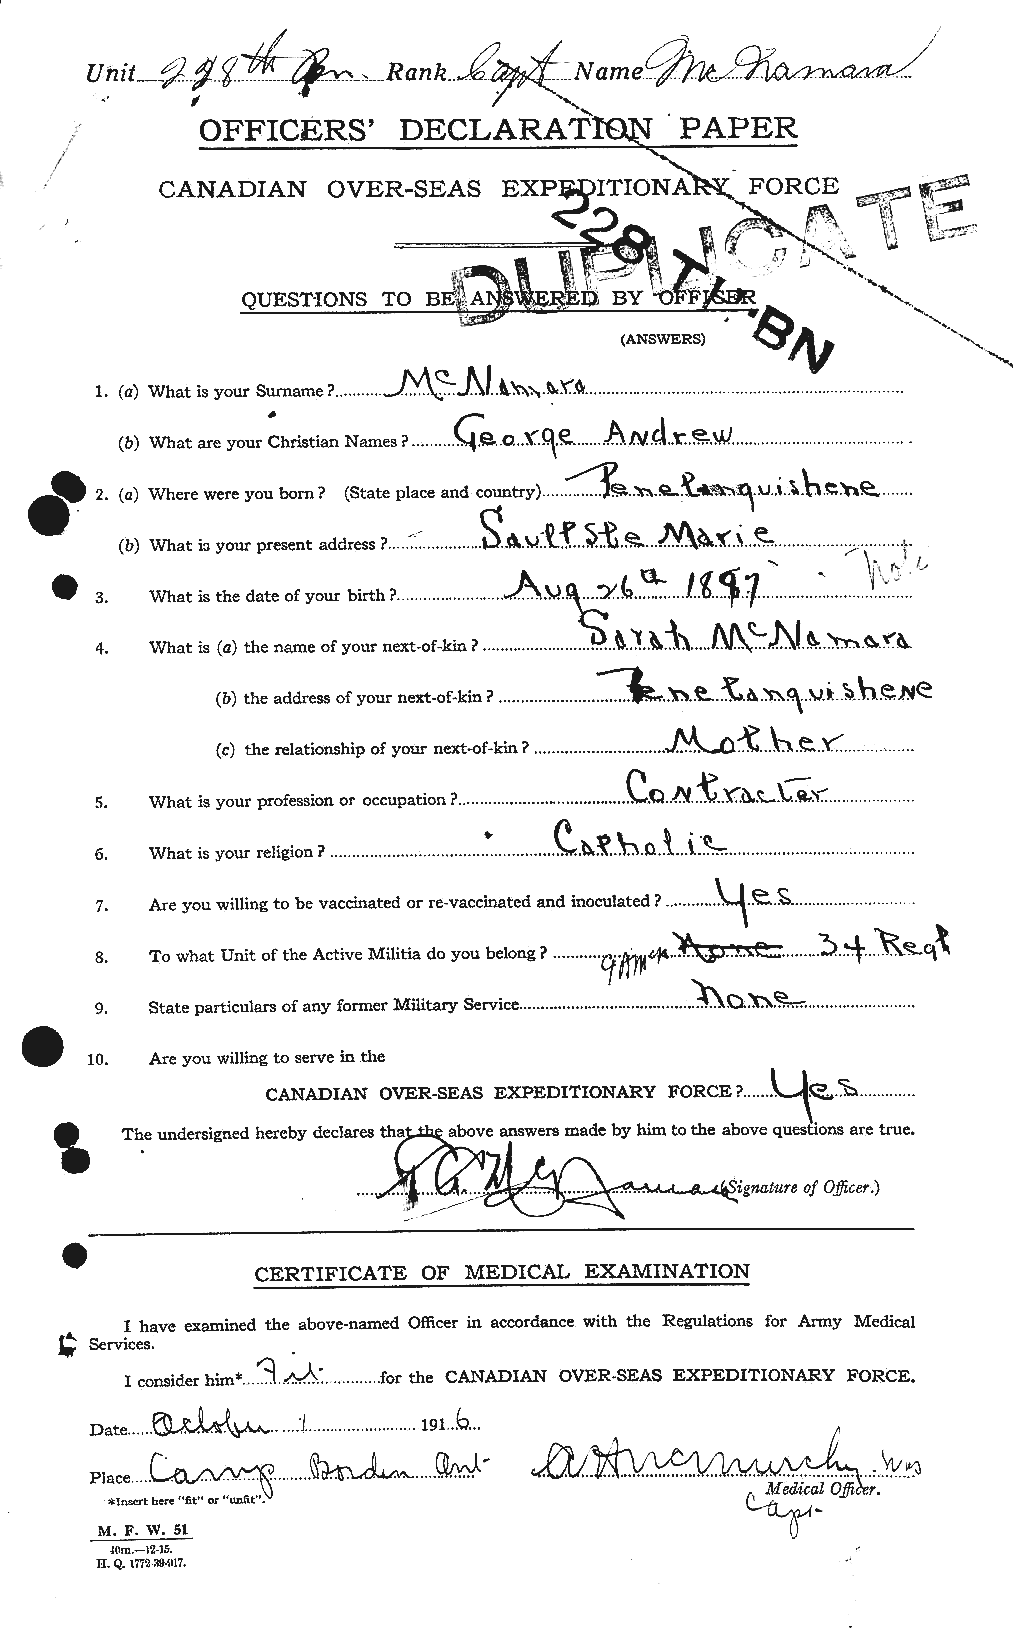 Personnel Records of the First World War - CEF 538236a